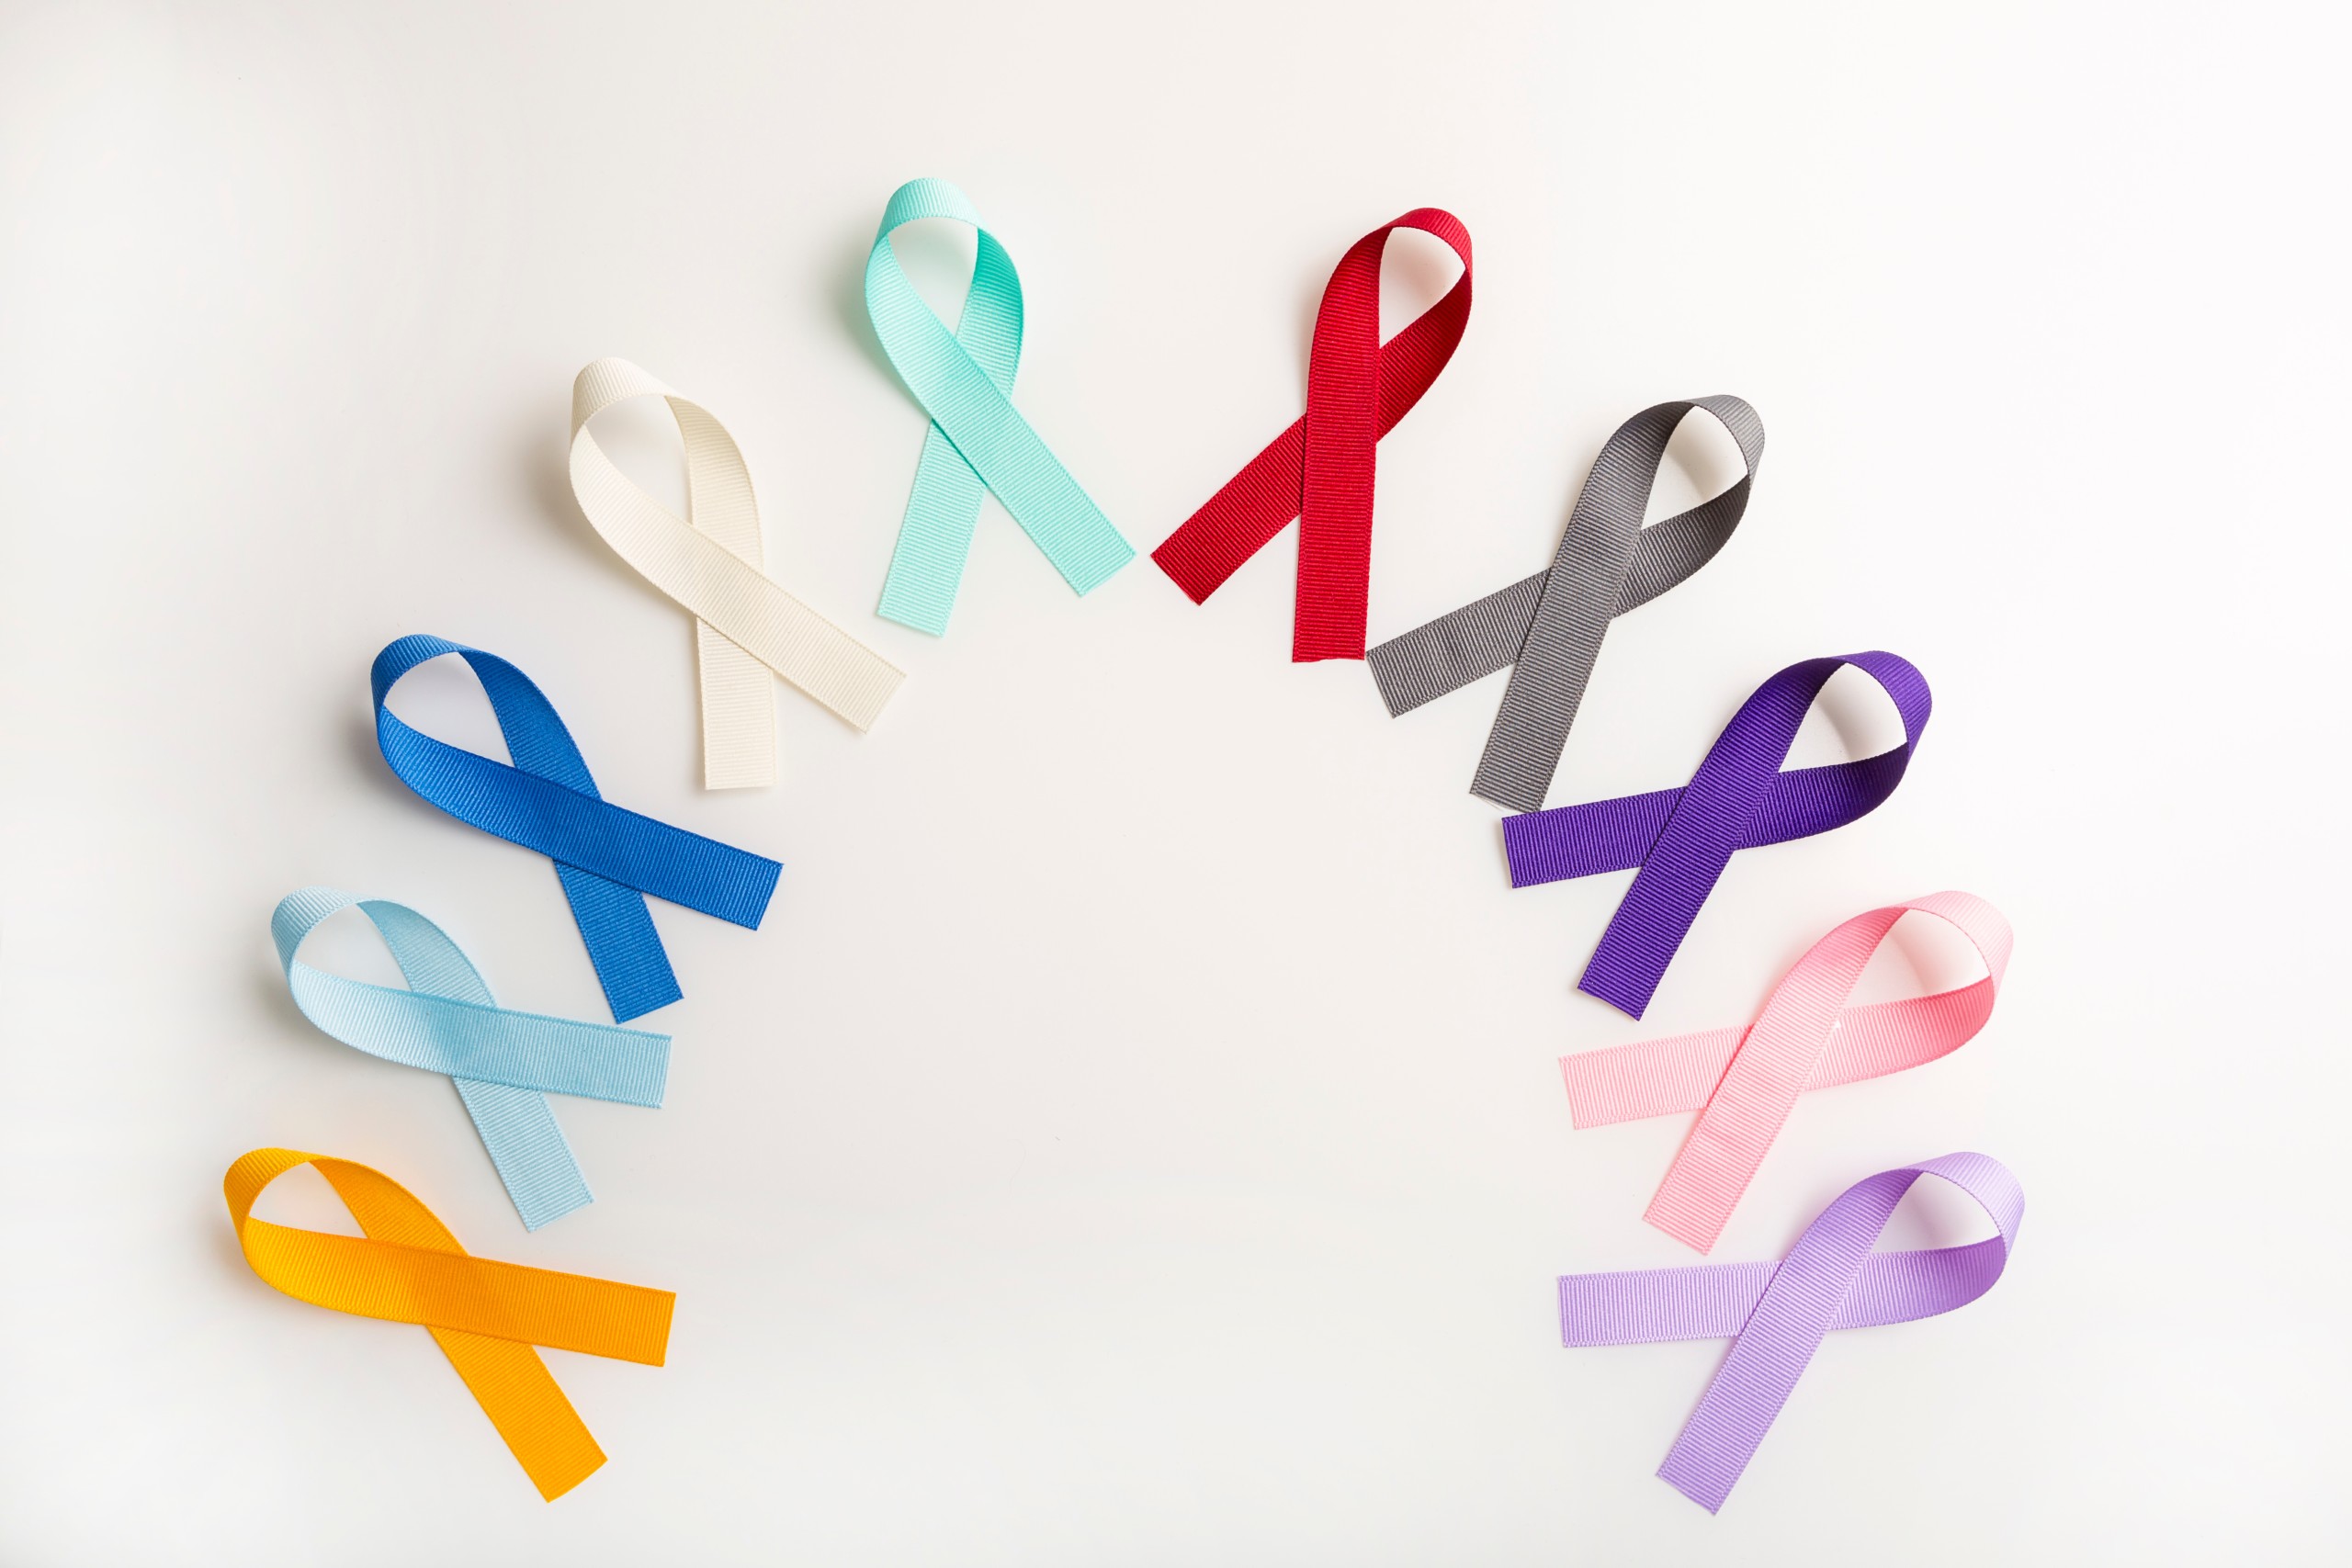 What Are the Most Common Types of Cancers? Do They Differ Between Men and Women?